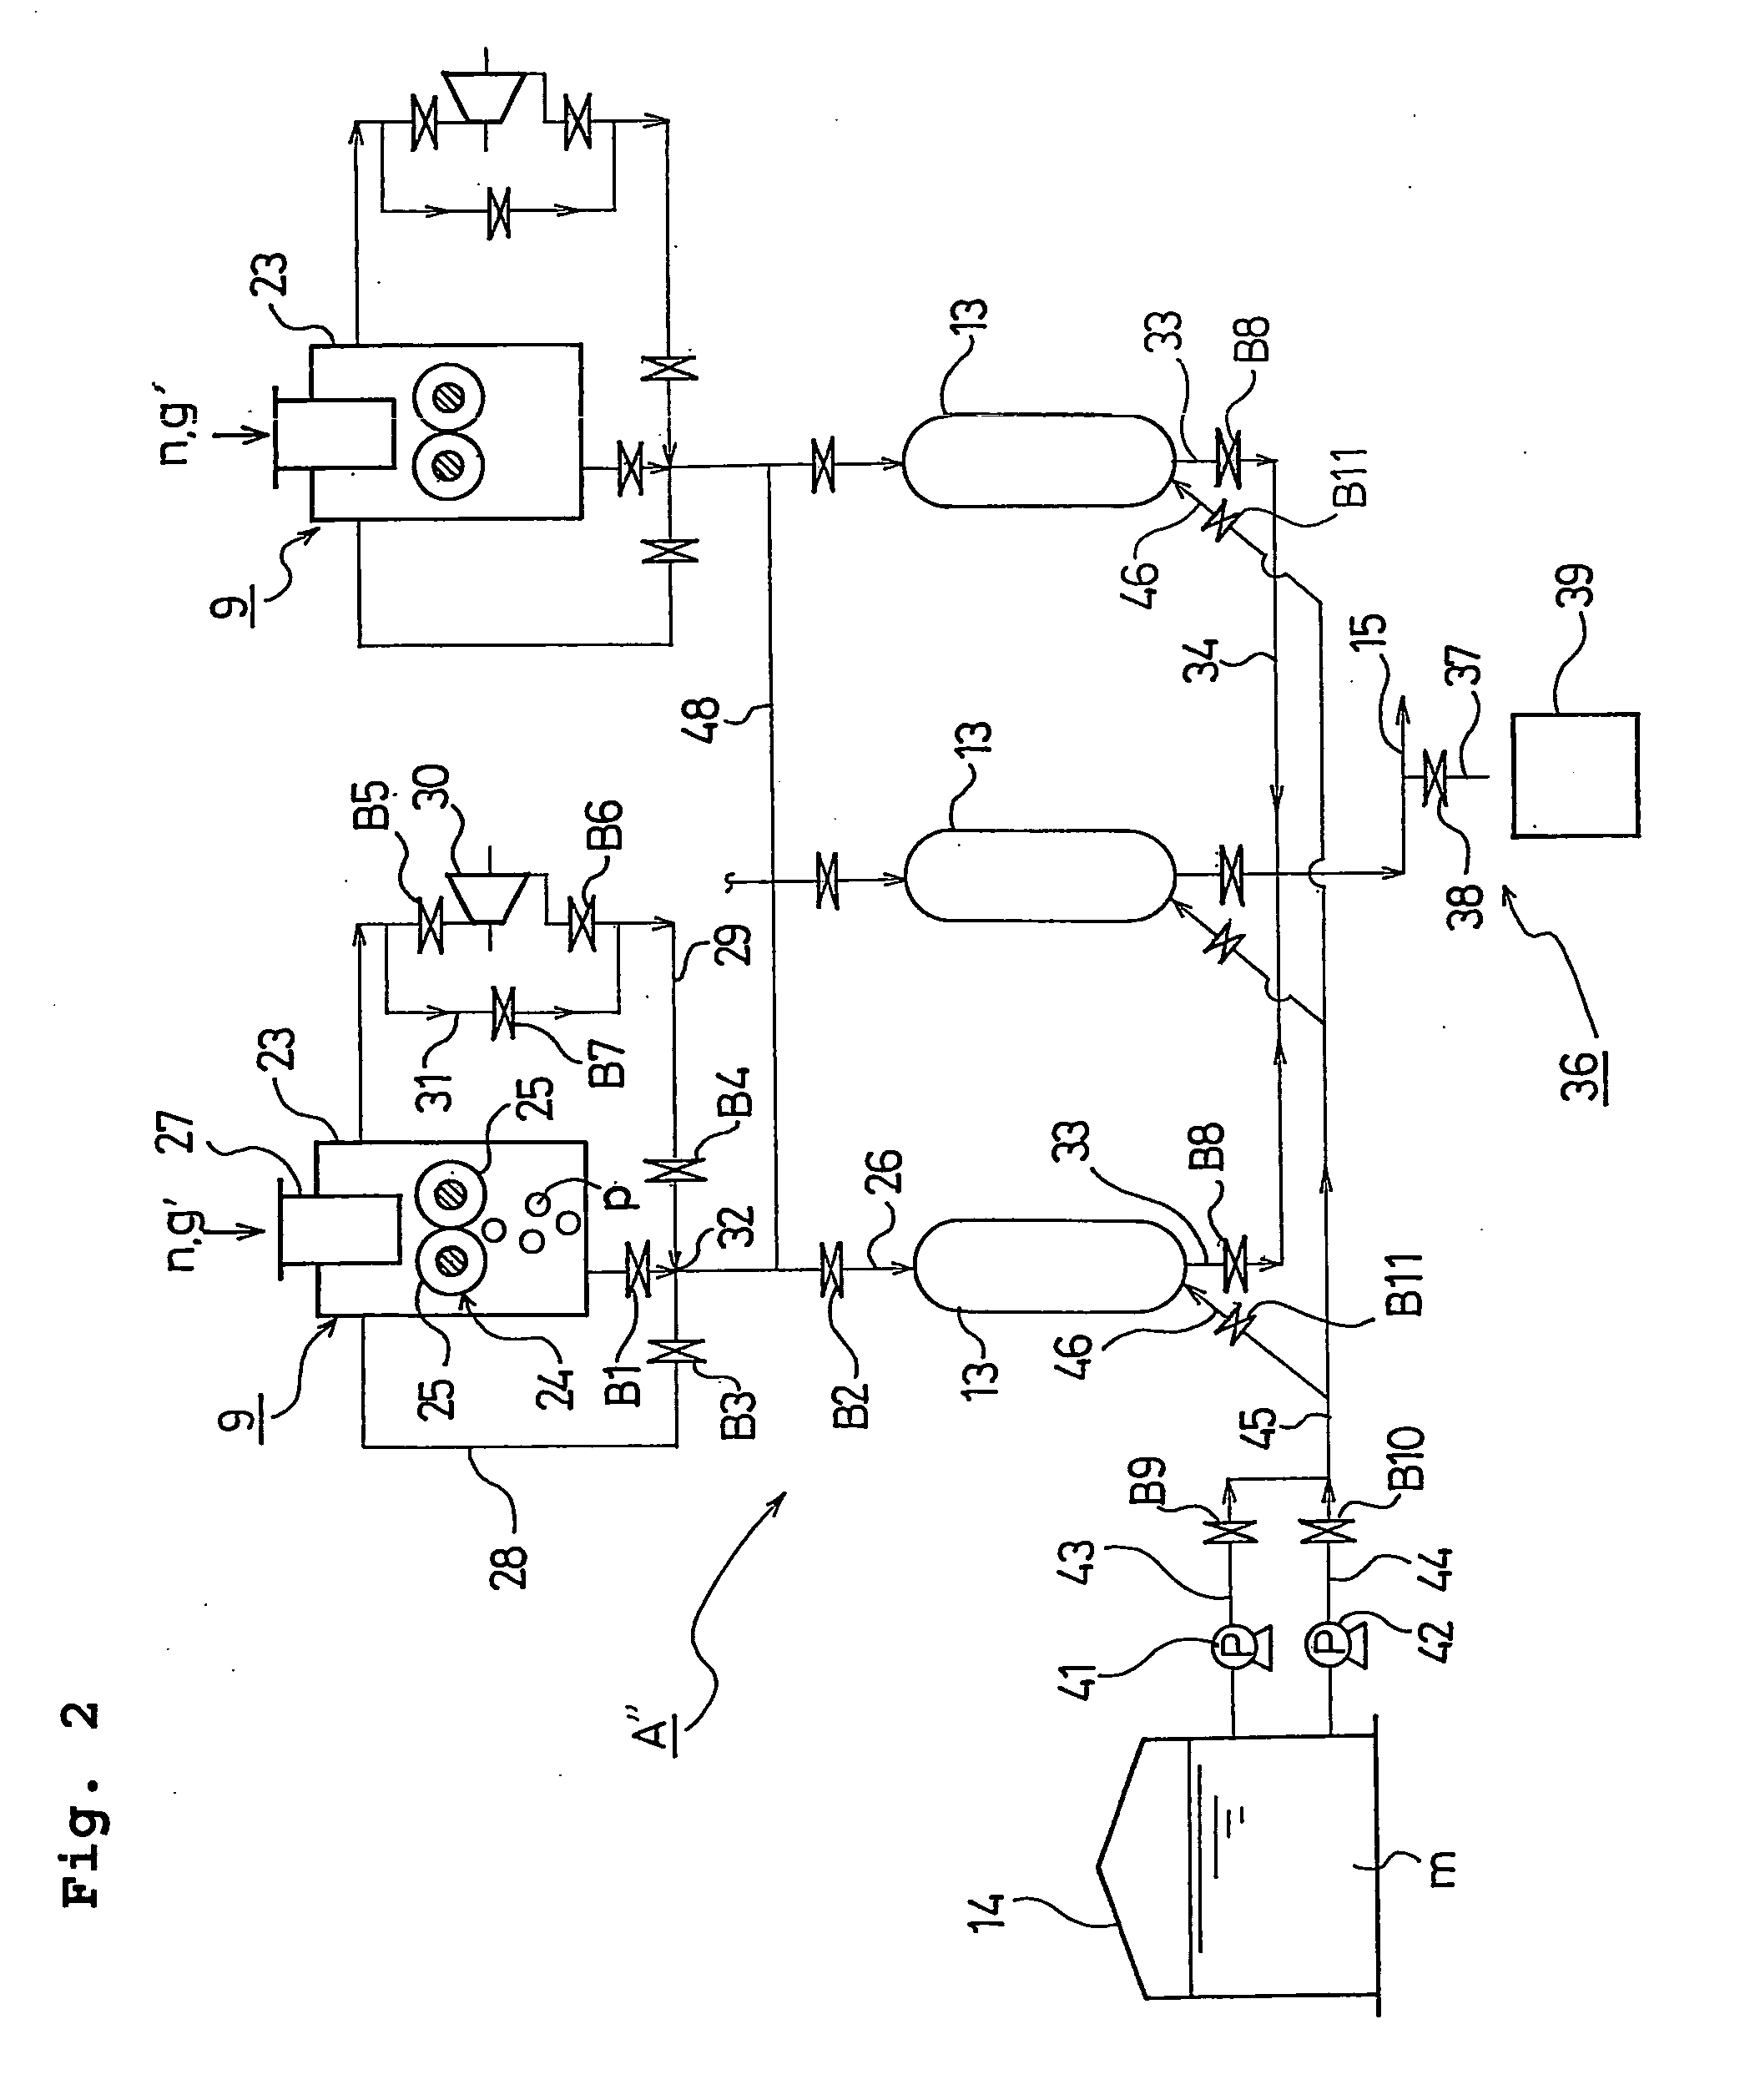 Method of production storage and transportation for gas hydrate